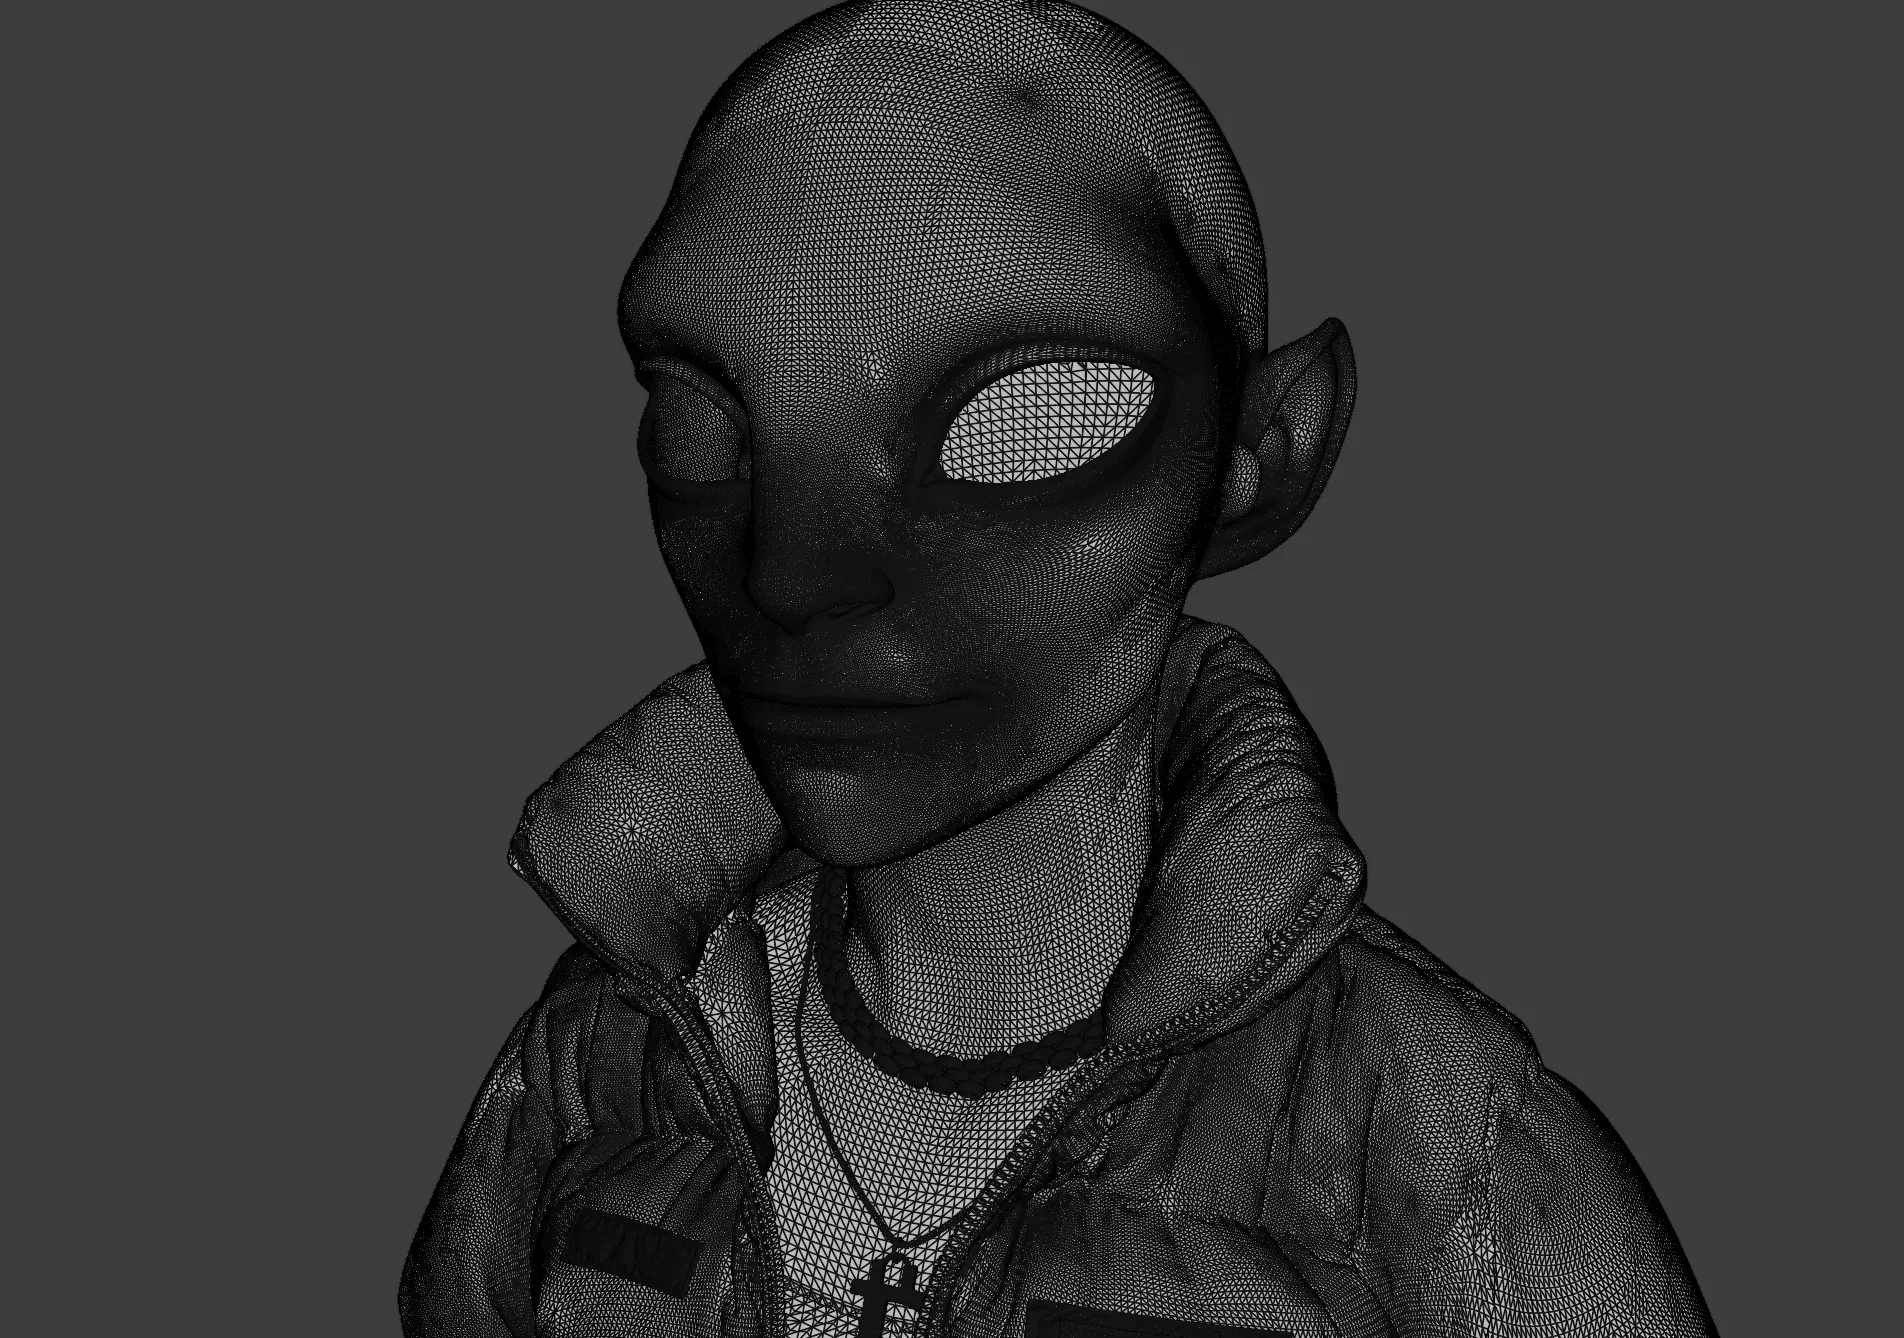 Alien NFT Model with all the source files and textures + source files